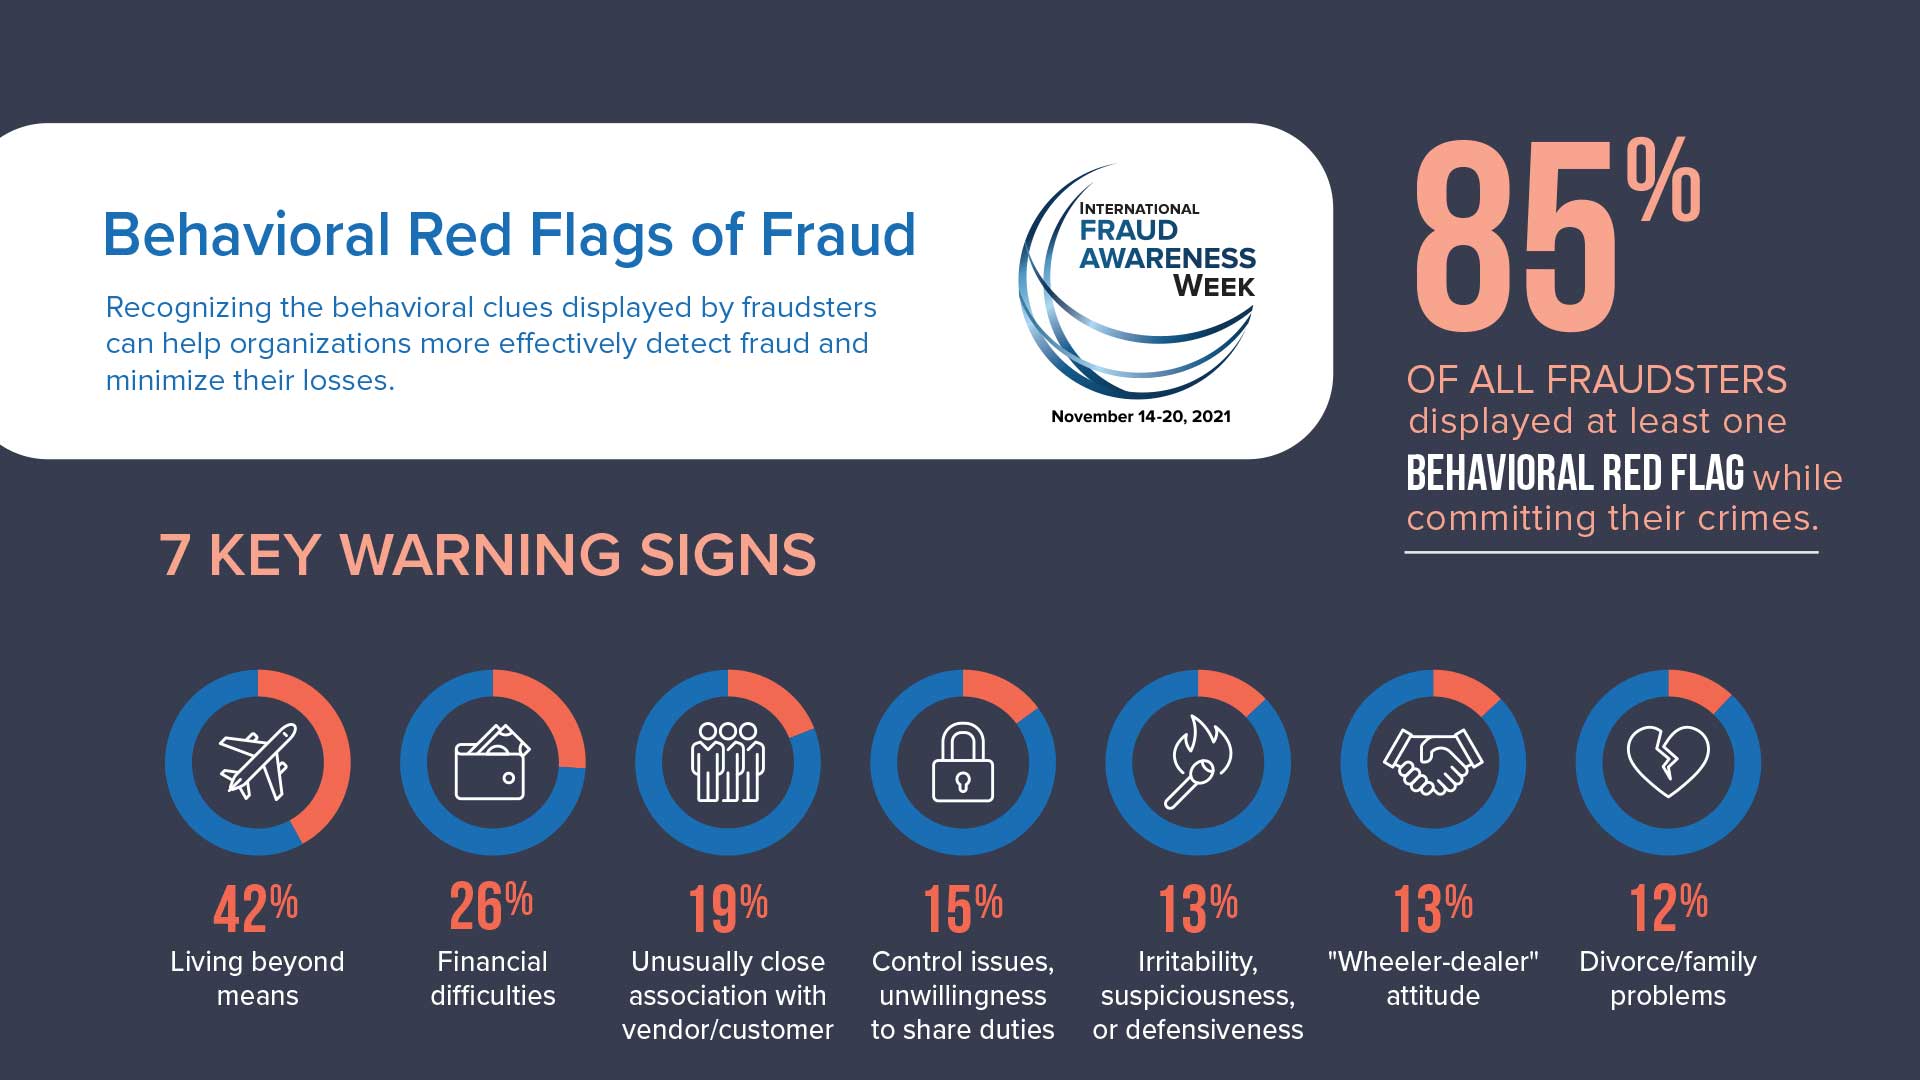 How can organizations spot the most common behavioral red flags displayed by fraudsters?